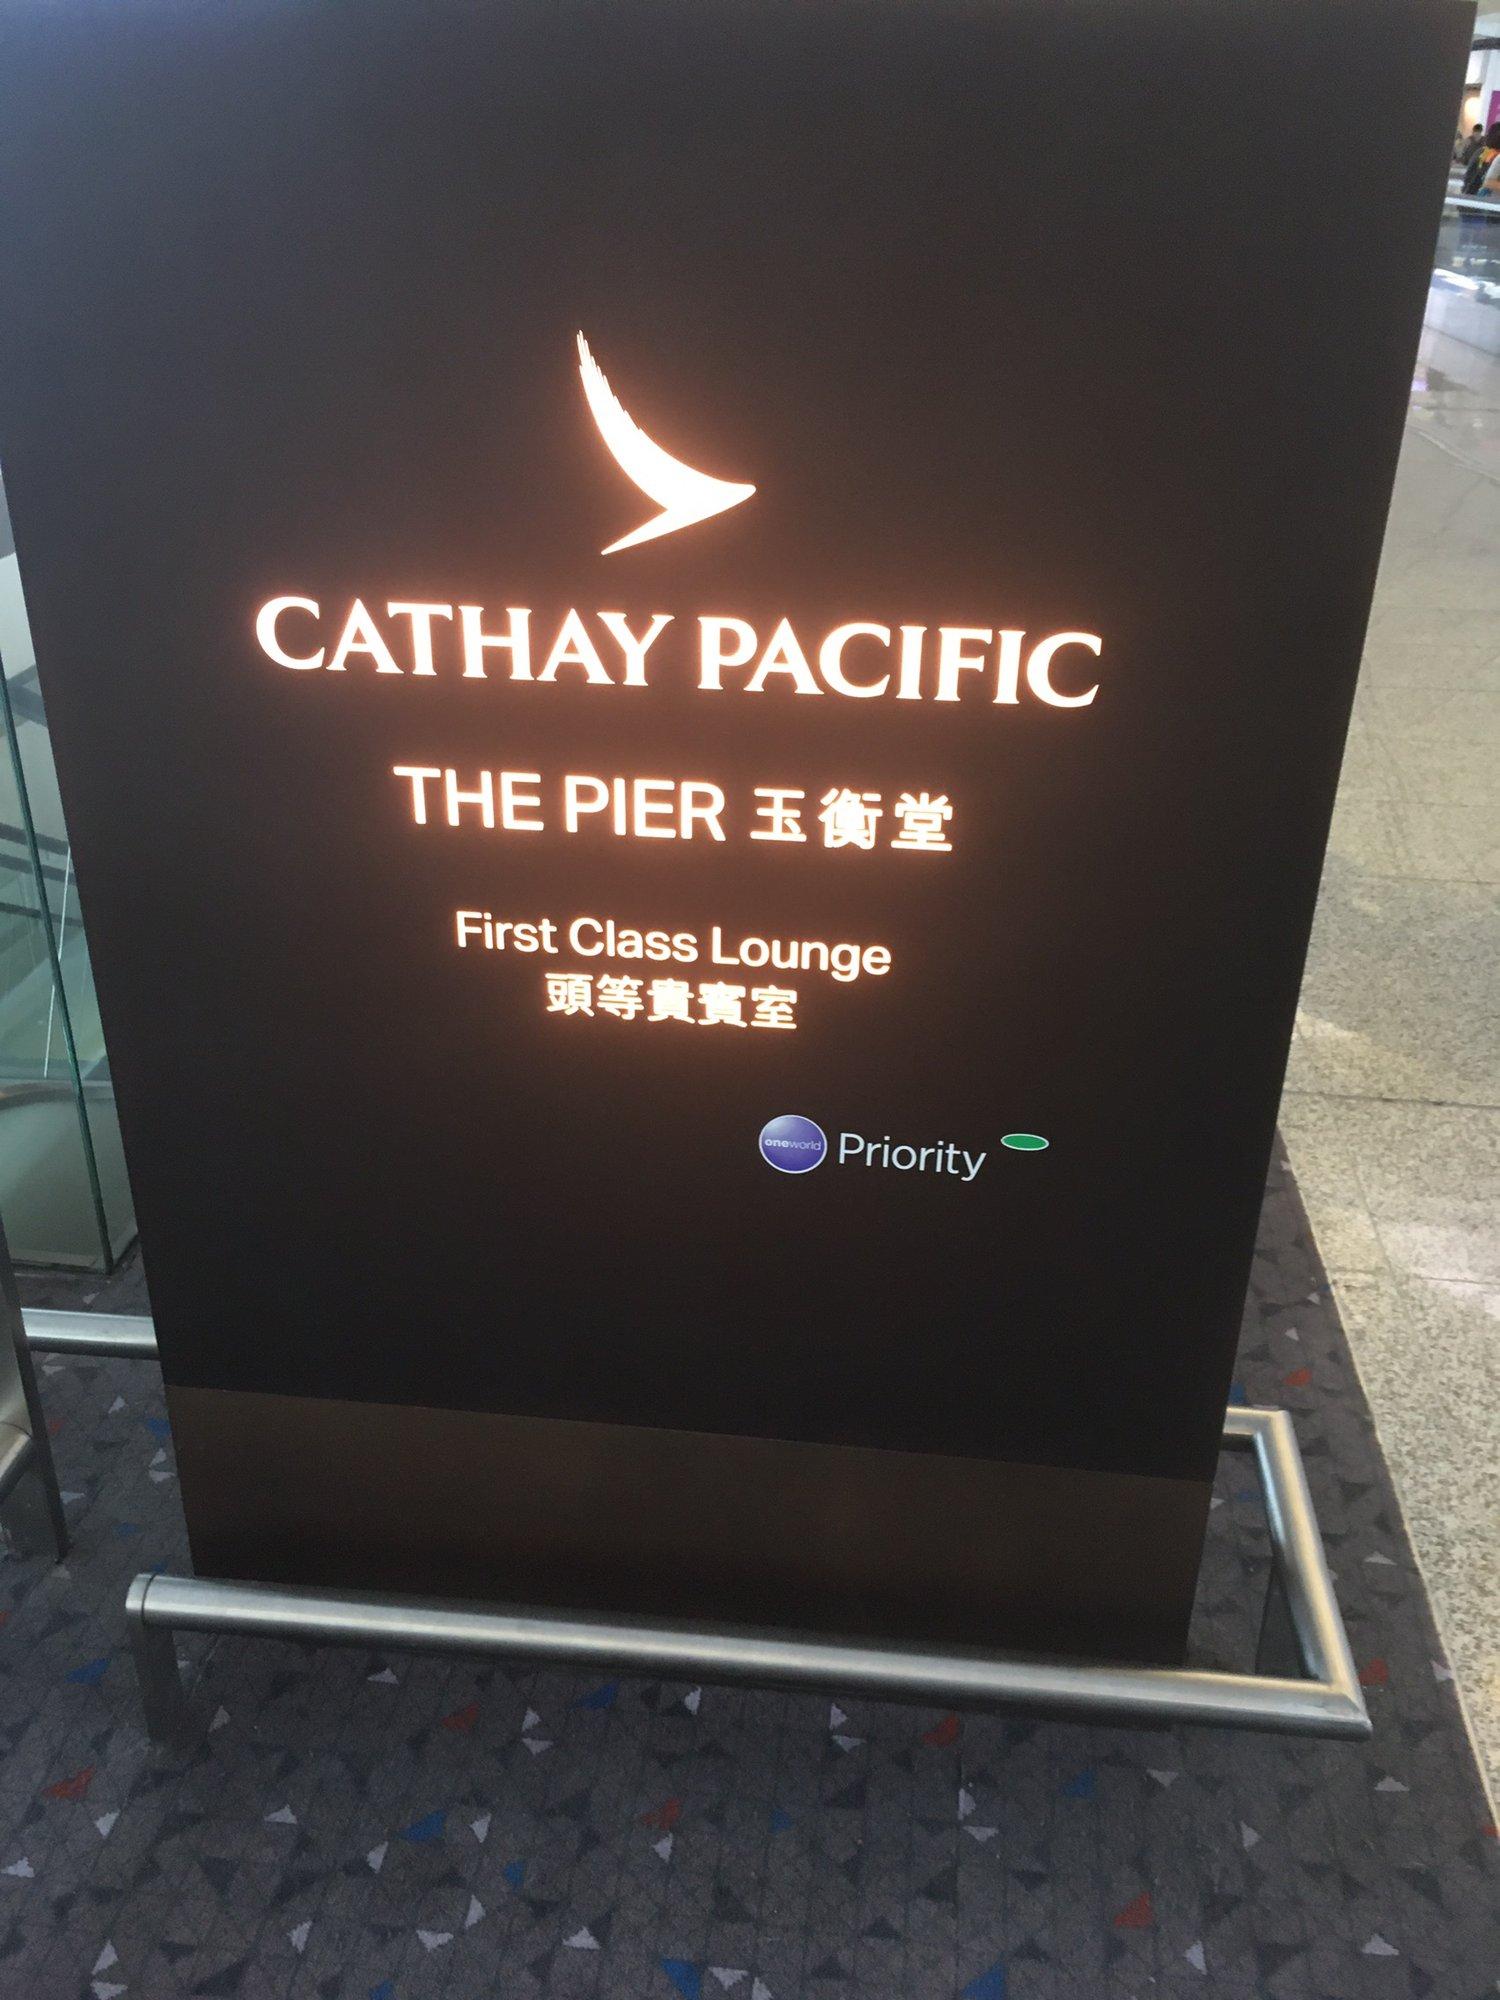 Cathay Pacific The Pier First Class Lounge image 97 of 100